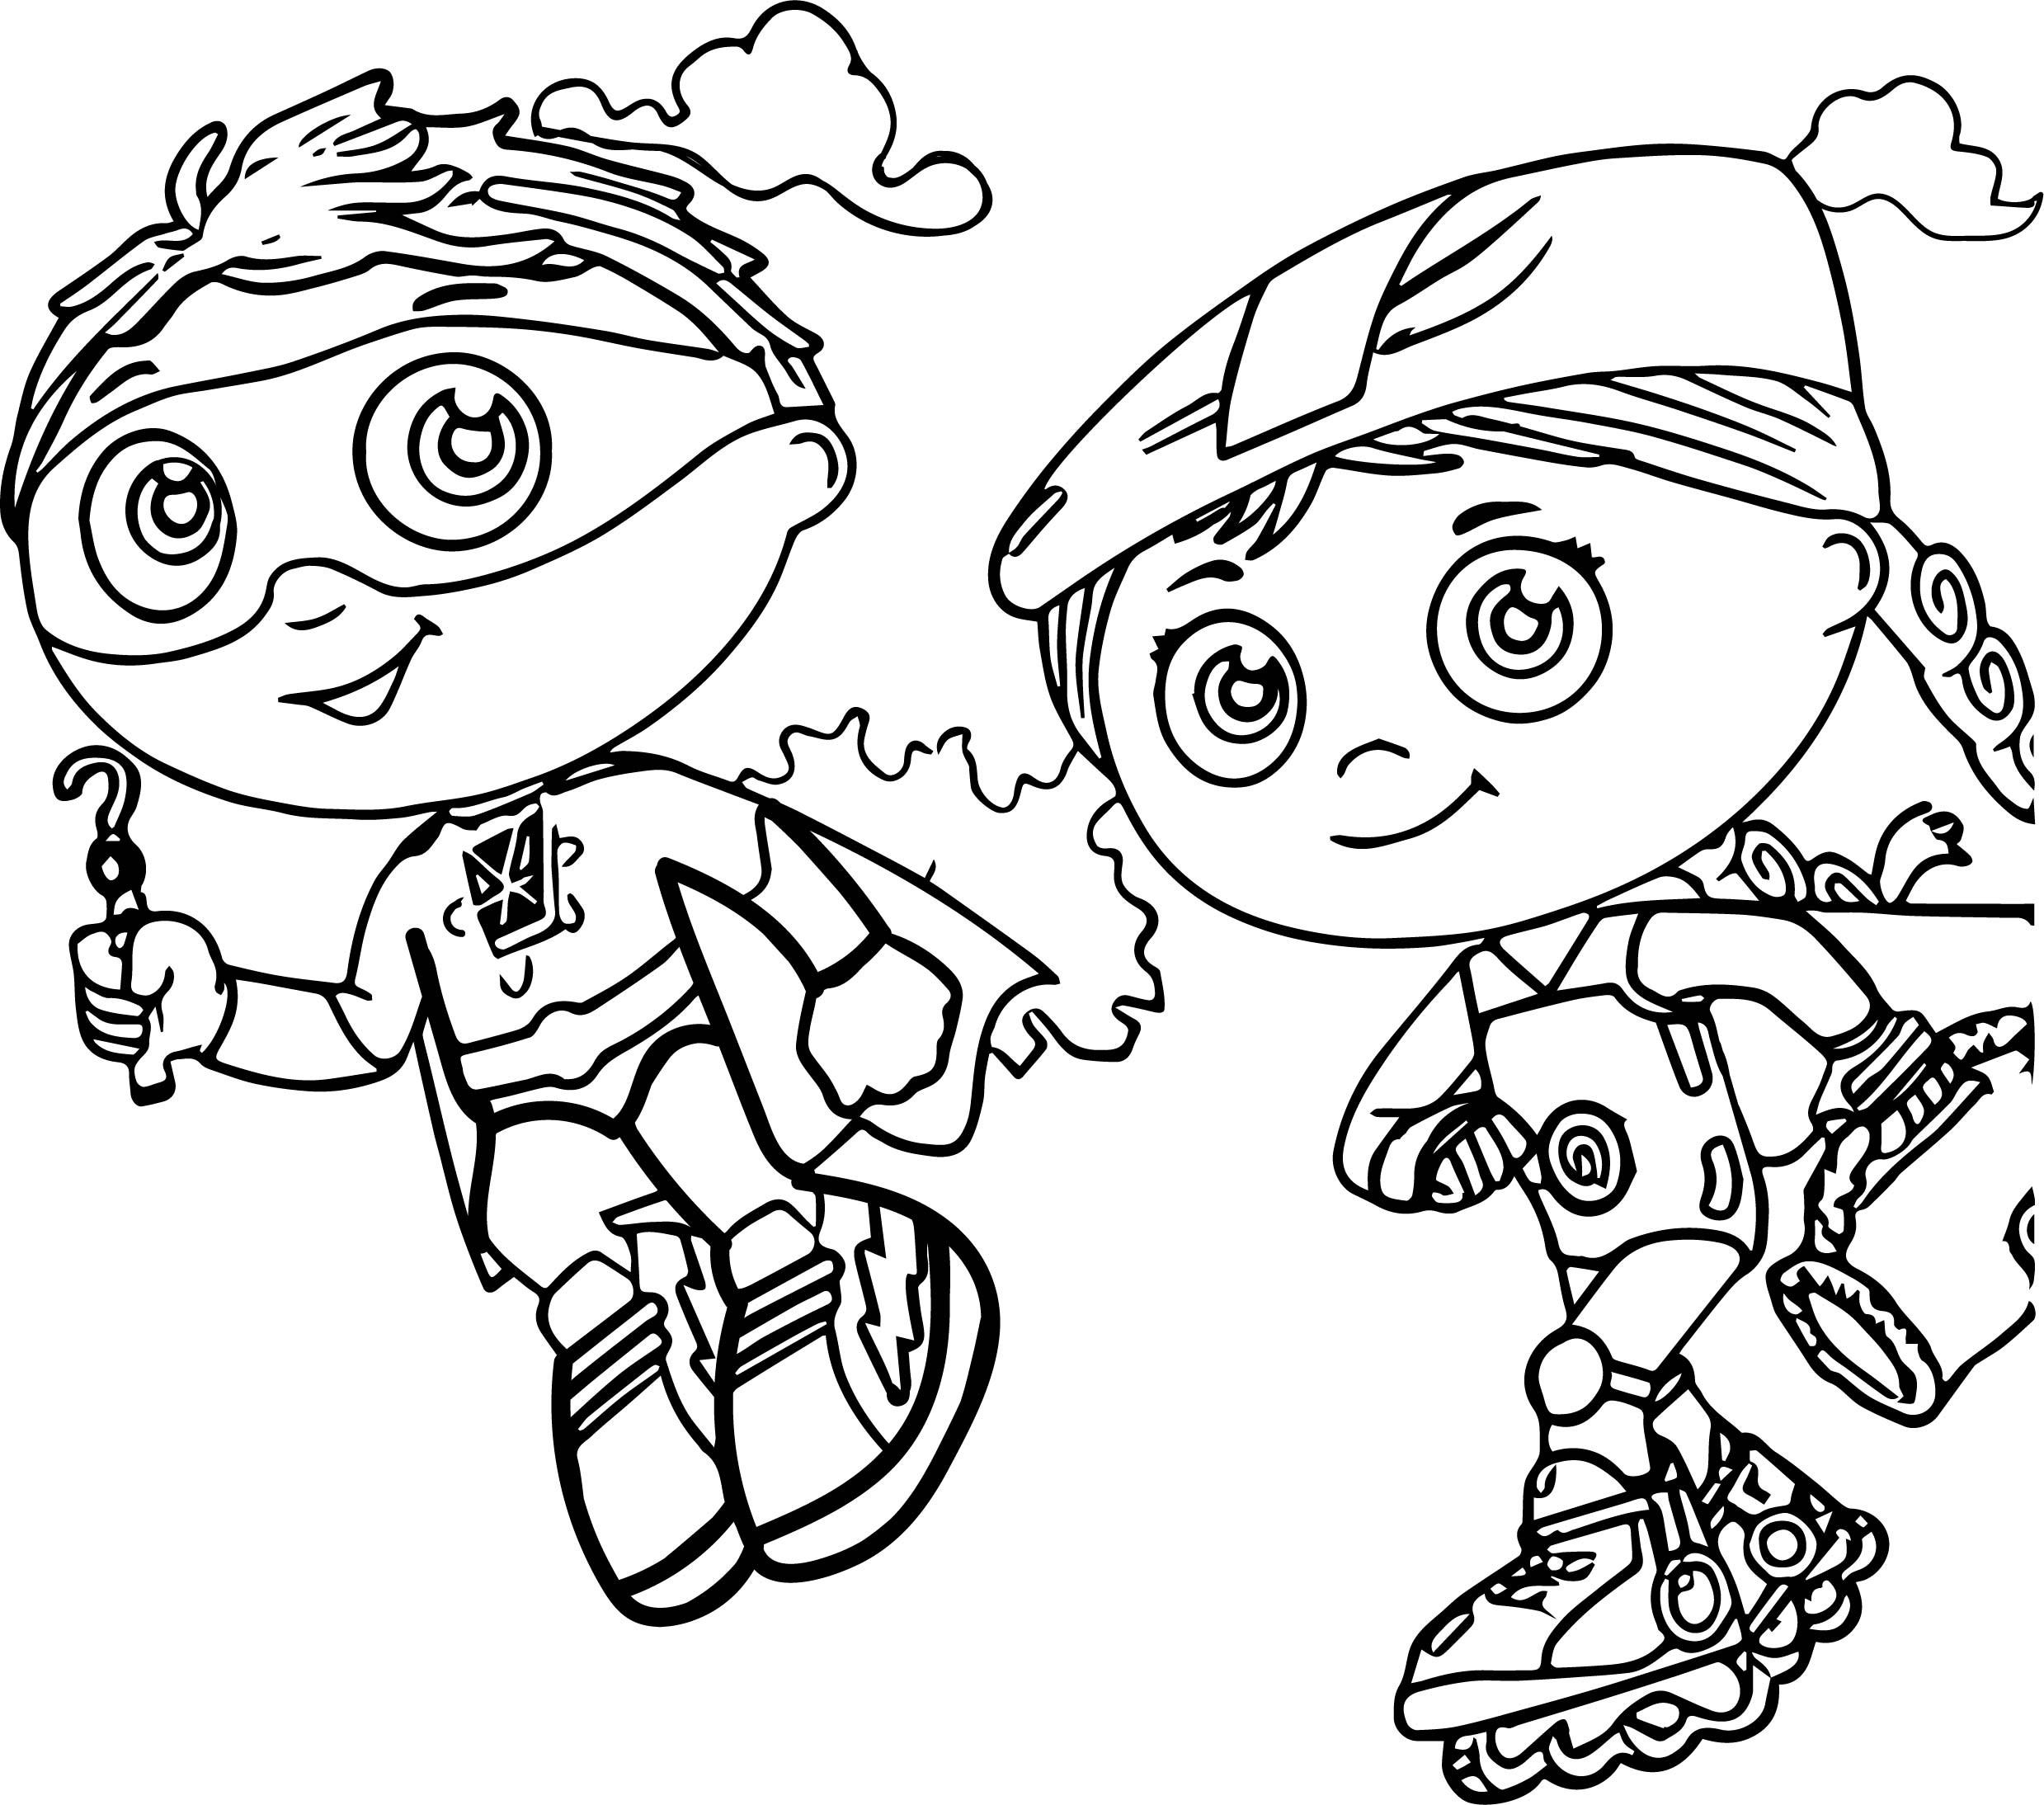 Super Coloring Pages
 Super Why Coloring Pages Best Coloring Pages For Kids